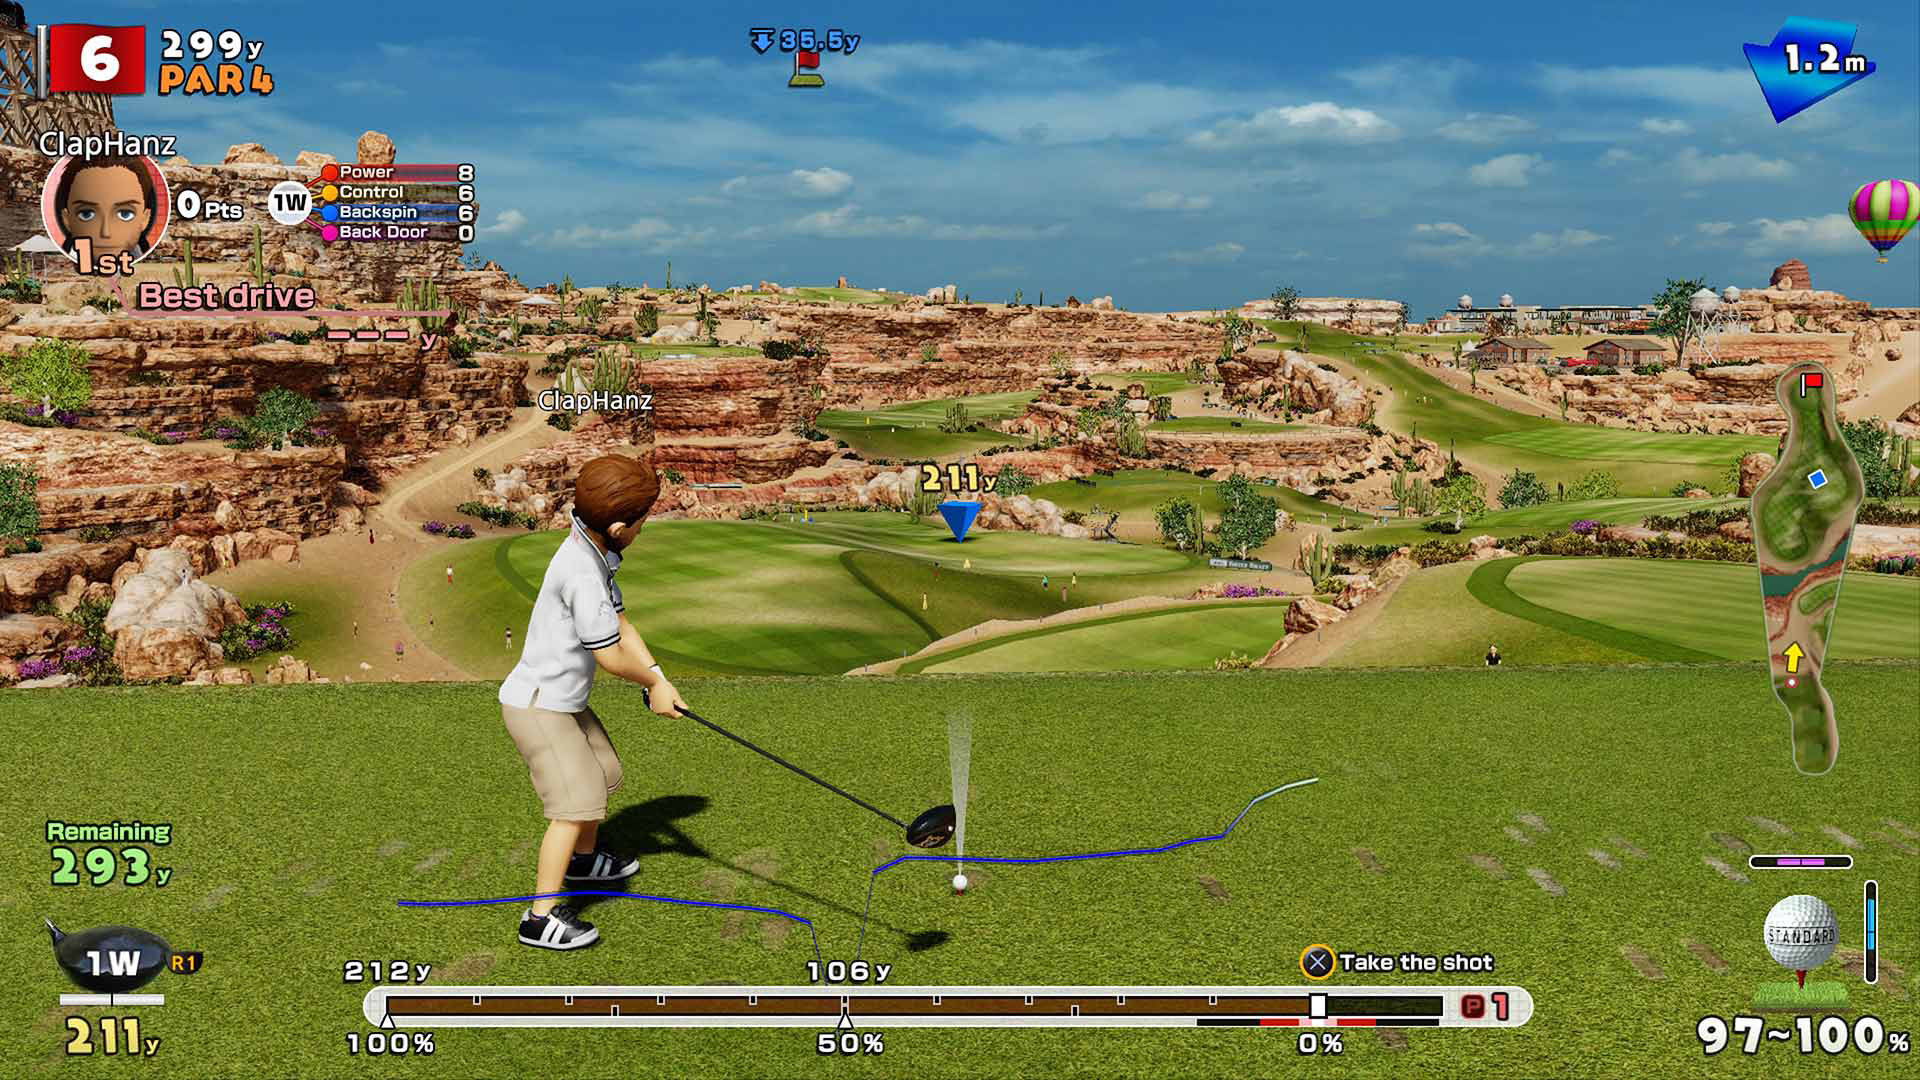 Sony's Simple PS4 Golf Game Yet Another Gem In a Year of Great Games